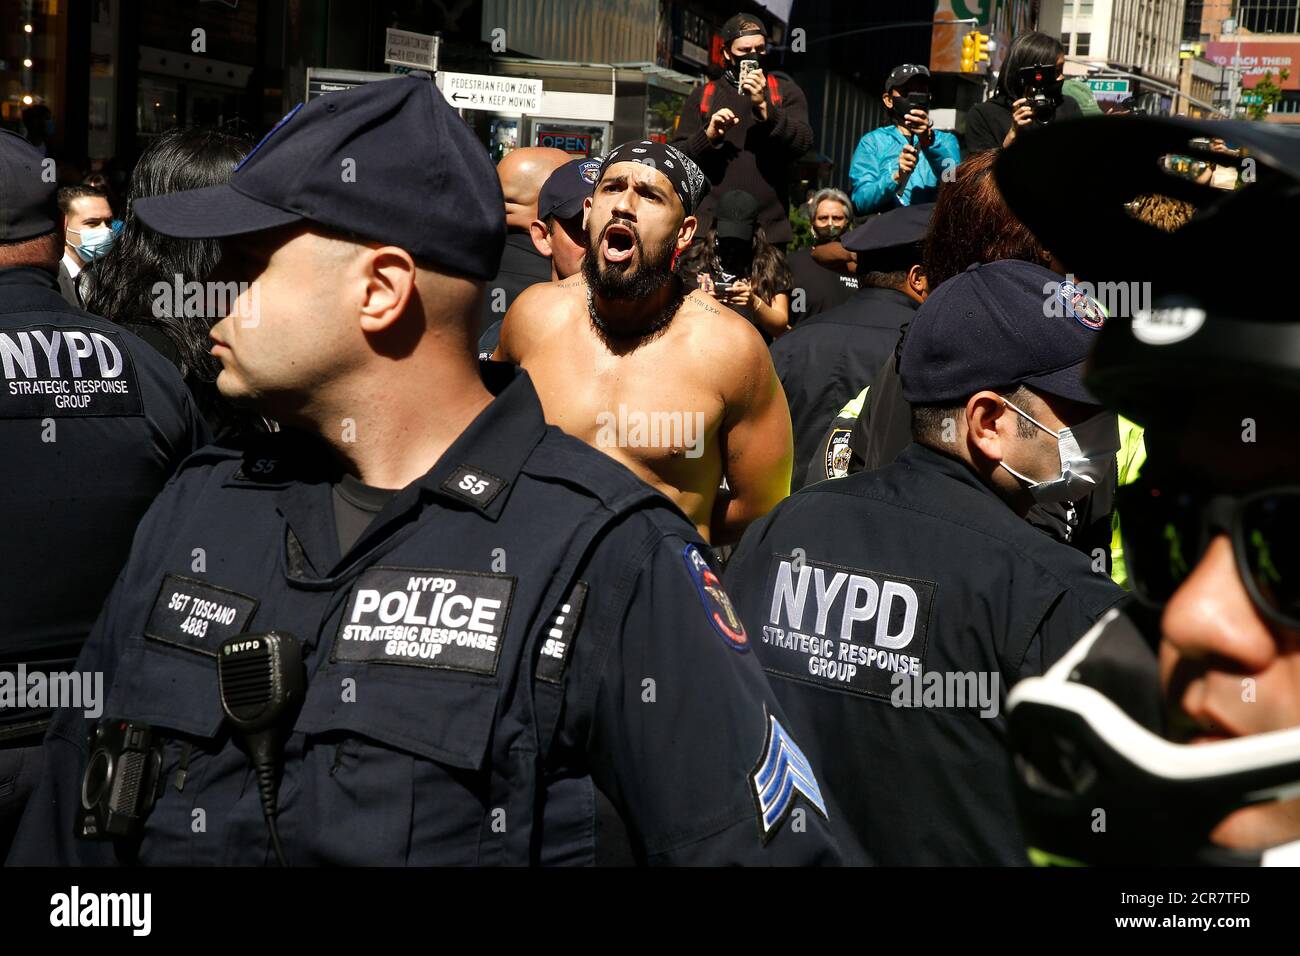 New York City, USA. 19th Sep, 2020. People protest BLM in the hundredths amidst police arrests on 9-19-2020 in New York City. Demonstrators rally in Times Square in support of Black Lives Matter and issues surrounding immigration. (Photo by John Lamparski/SIPA USA) Credit: Sipa USA/Alamy Live News Stock Photo